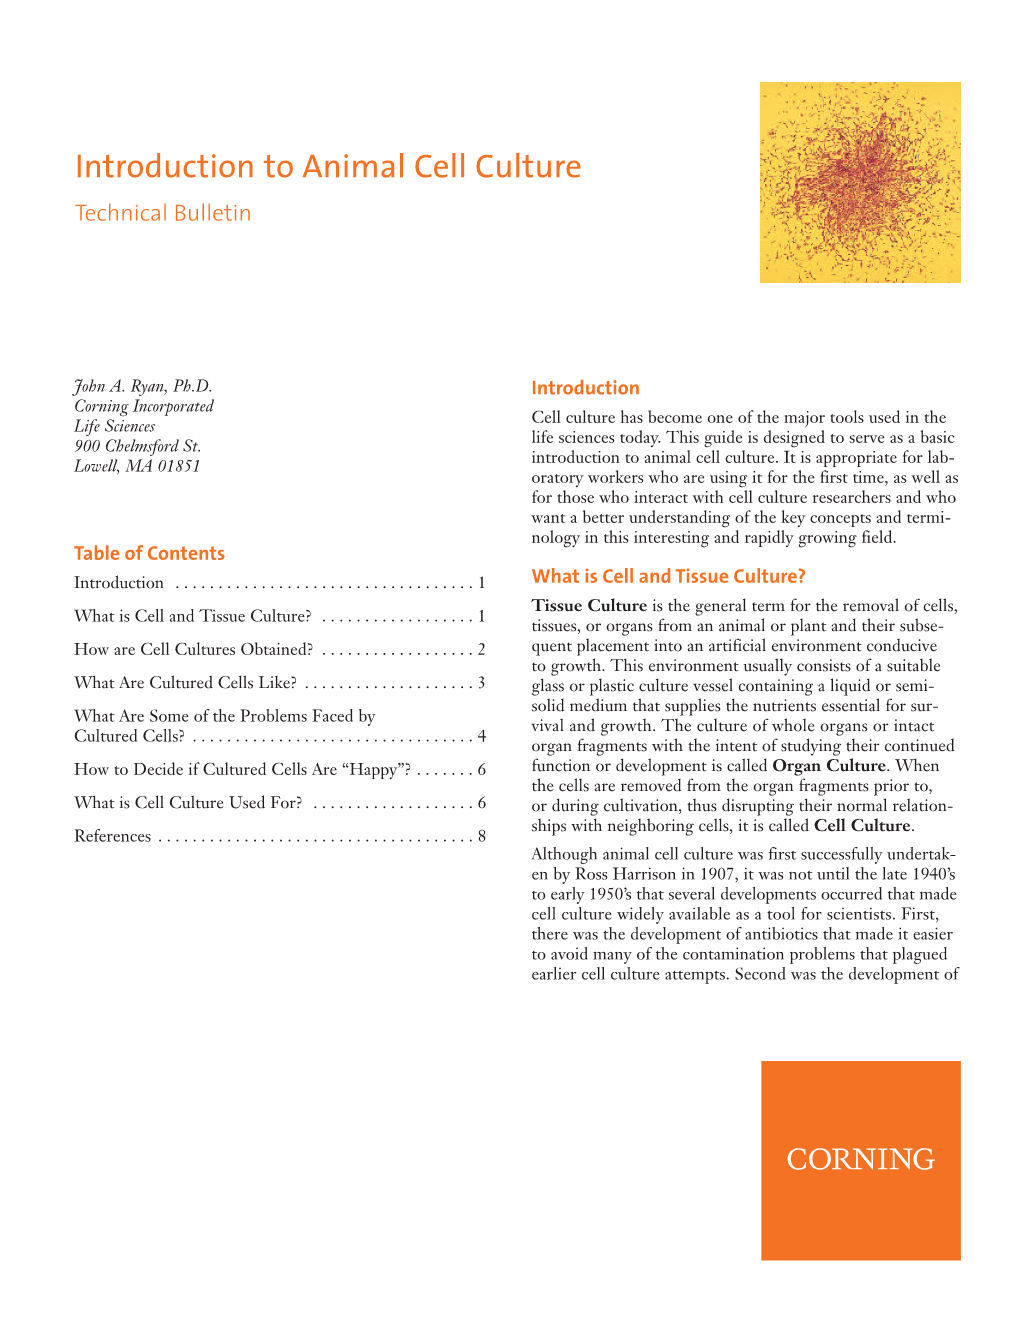 Introduction to Animal Cell Culture Technical Bulletin